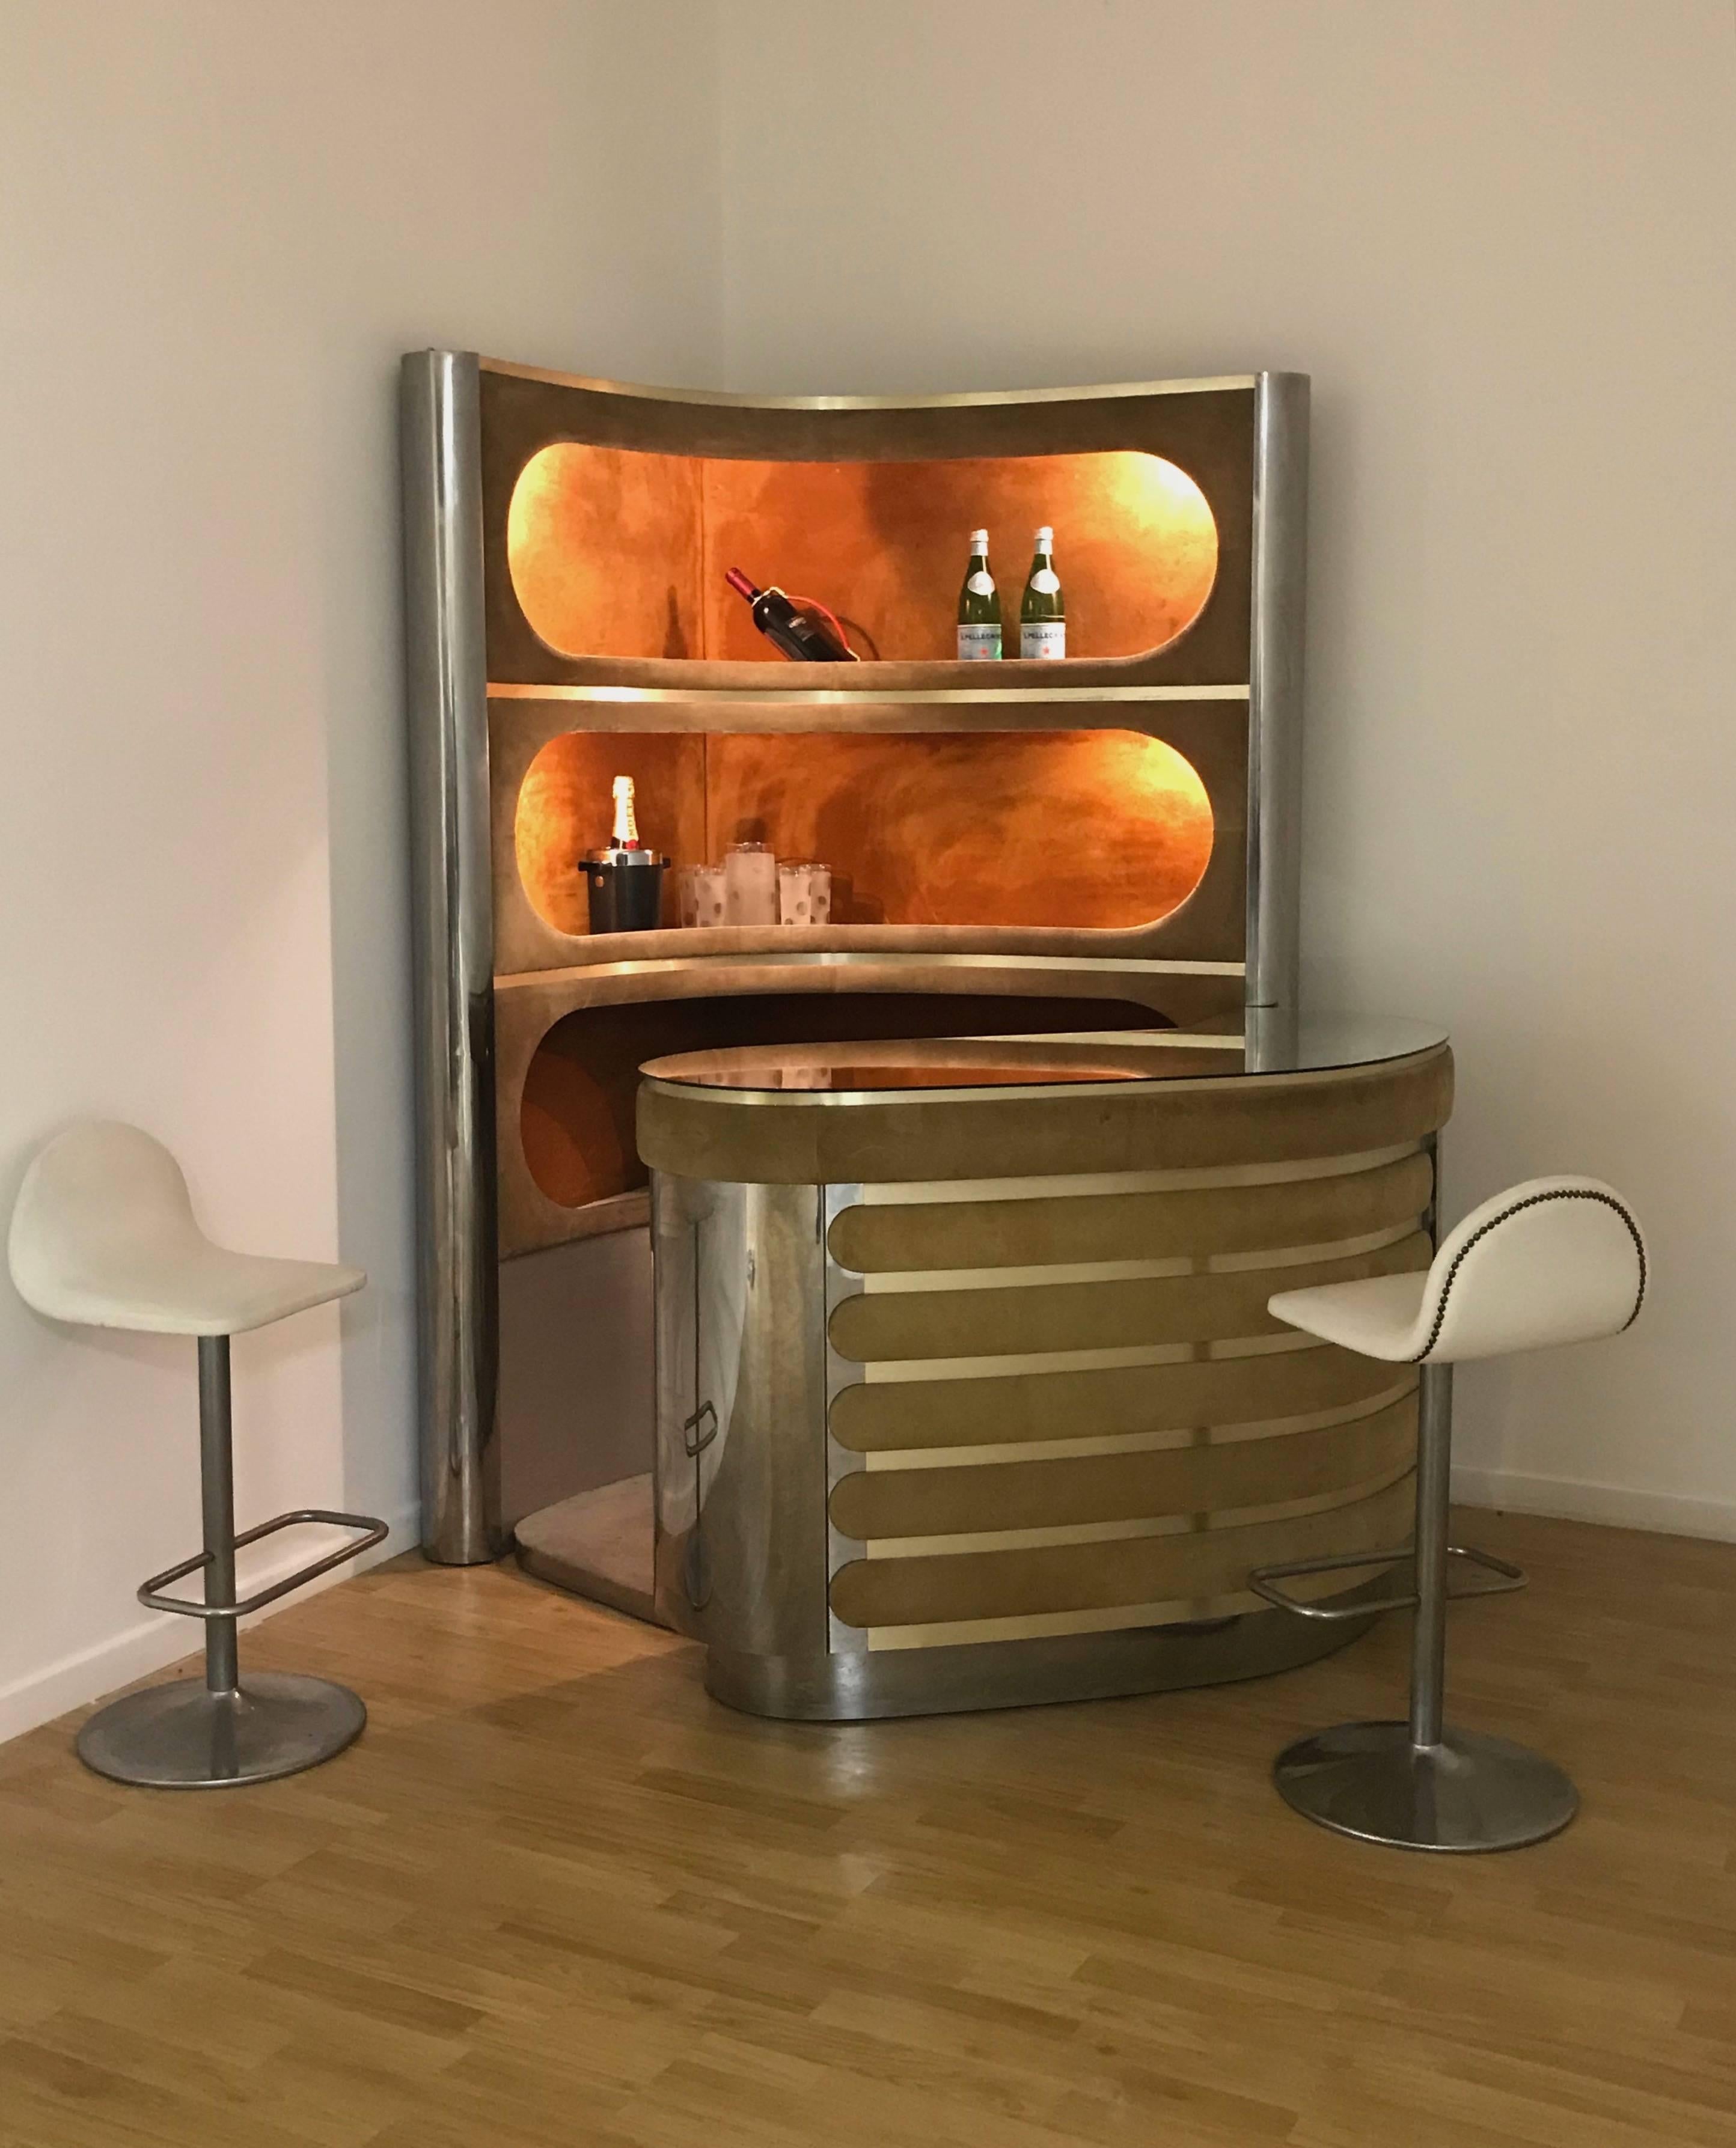 Illuminated bar and warehouse in the style of Willy Rizzo, Italy, early 1970s. The set includes a counter with a mirrored glass top, chrome sides and a suede front panel. A fridge is installed below. The storage unit offers three corner shelves,